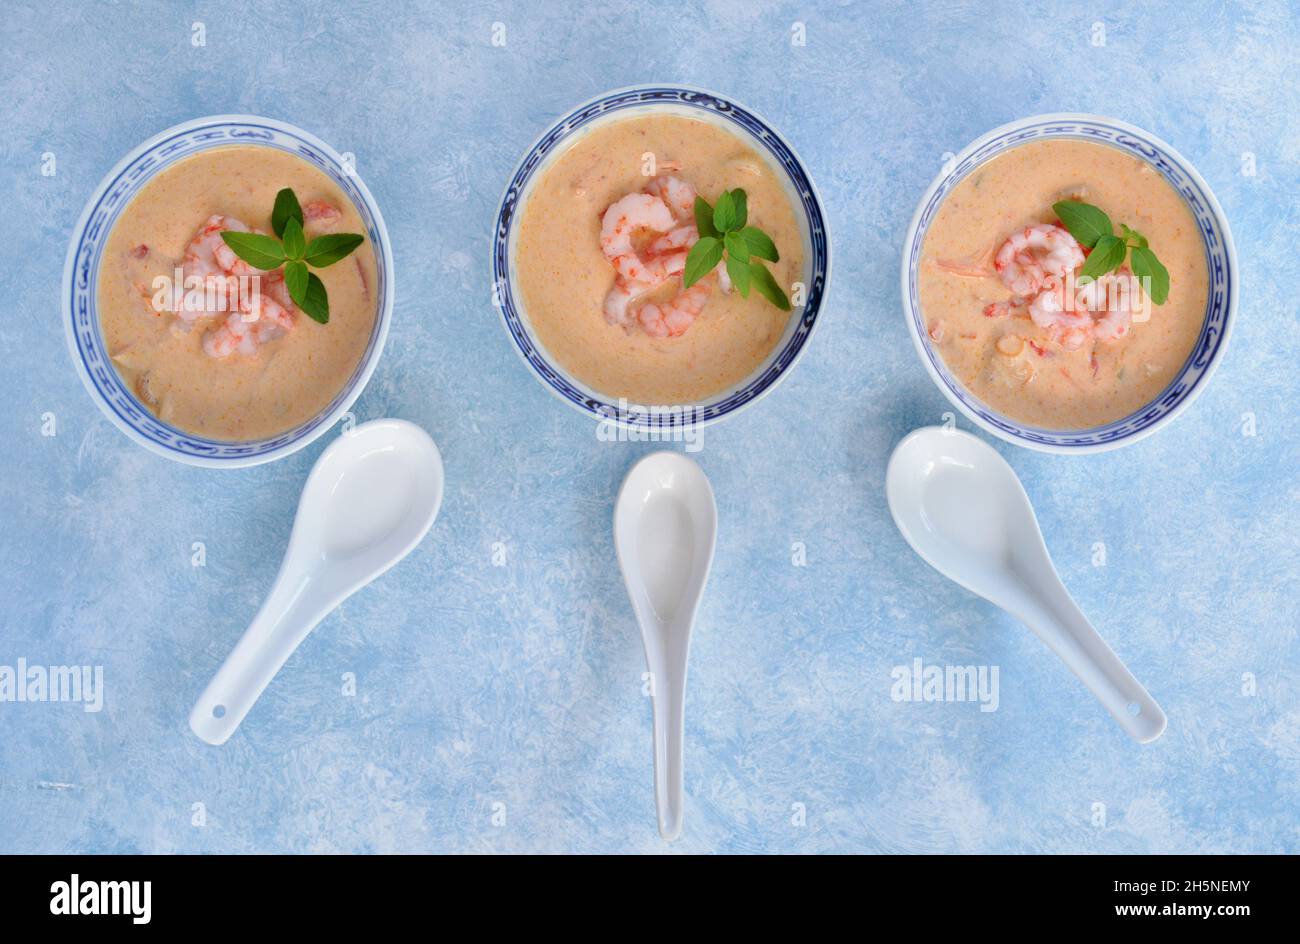 Spicy Thai red curry and coconut with prawns soup in traditional blue and white chinese bowls in horizontal format with thai basil garnish. Stock Photo